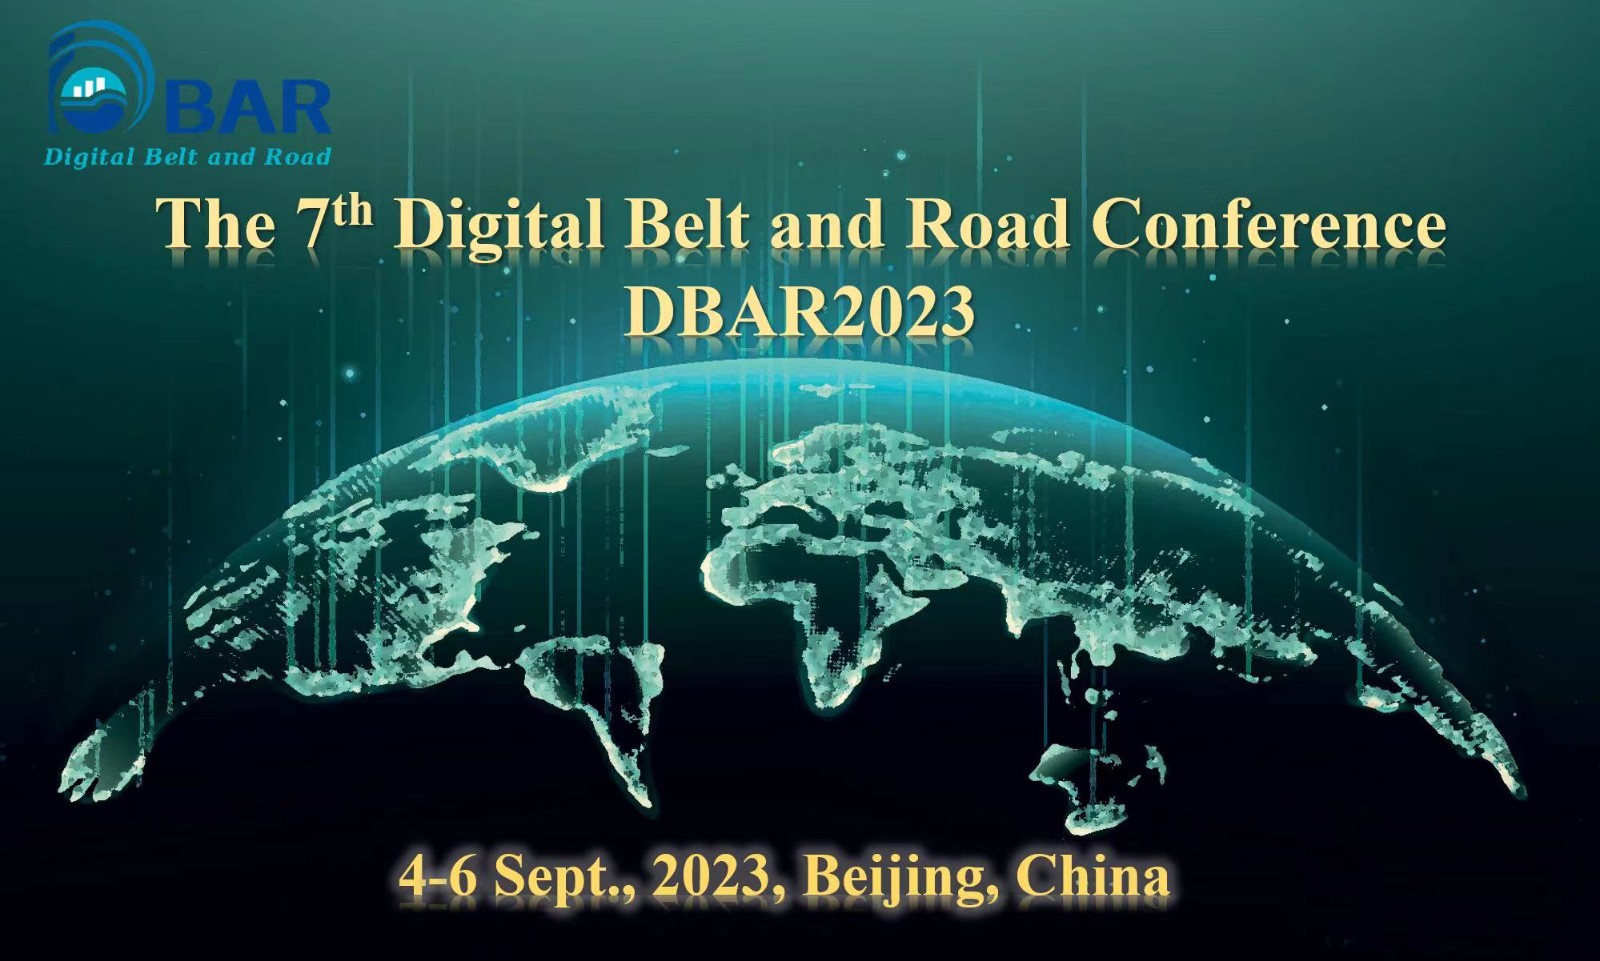  First Announcement of The 7th Digital Belt and Road Conference (DBAR2023)